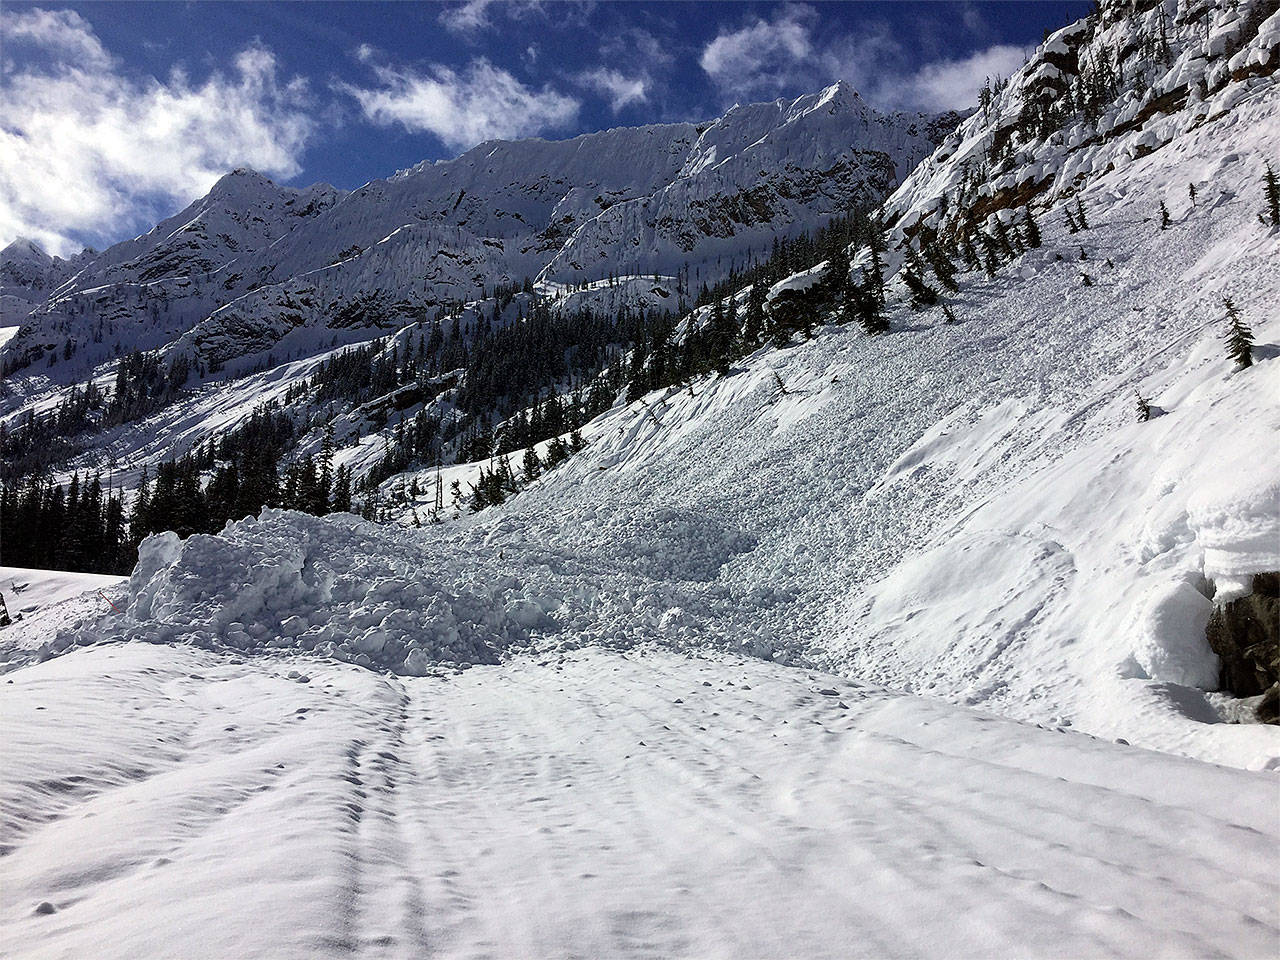 Washington State Department of Transportation avalanche technicians ventured into the closed section of Highway 20 on March 16 to assess conditions, snow levels and safety risks, including this slide near Liberty Bell Mountain. Crews hope to begin clearing the highway in April after the threat of further avalanches has passed. (WSDOT photo)